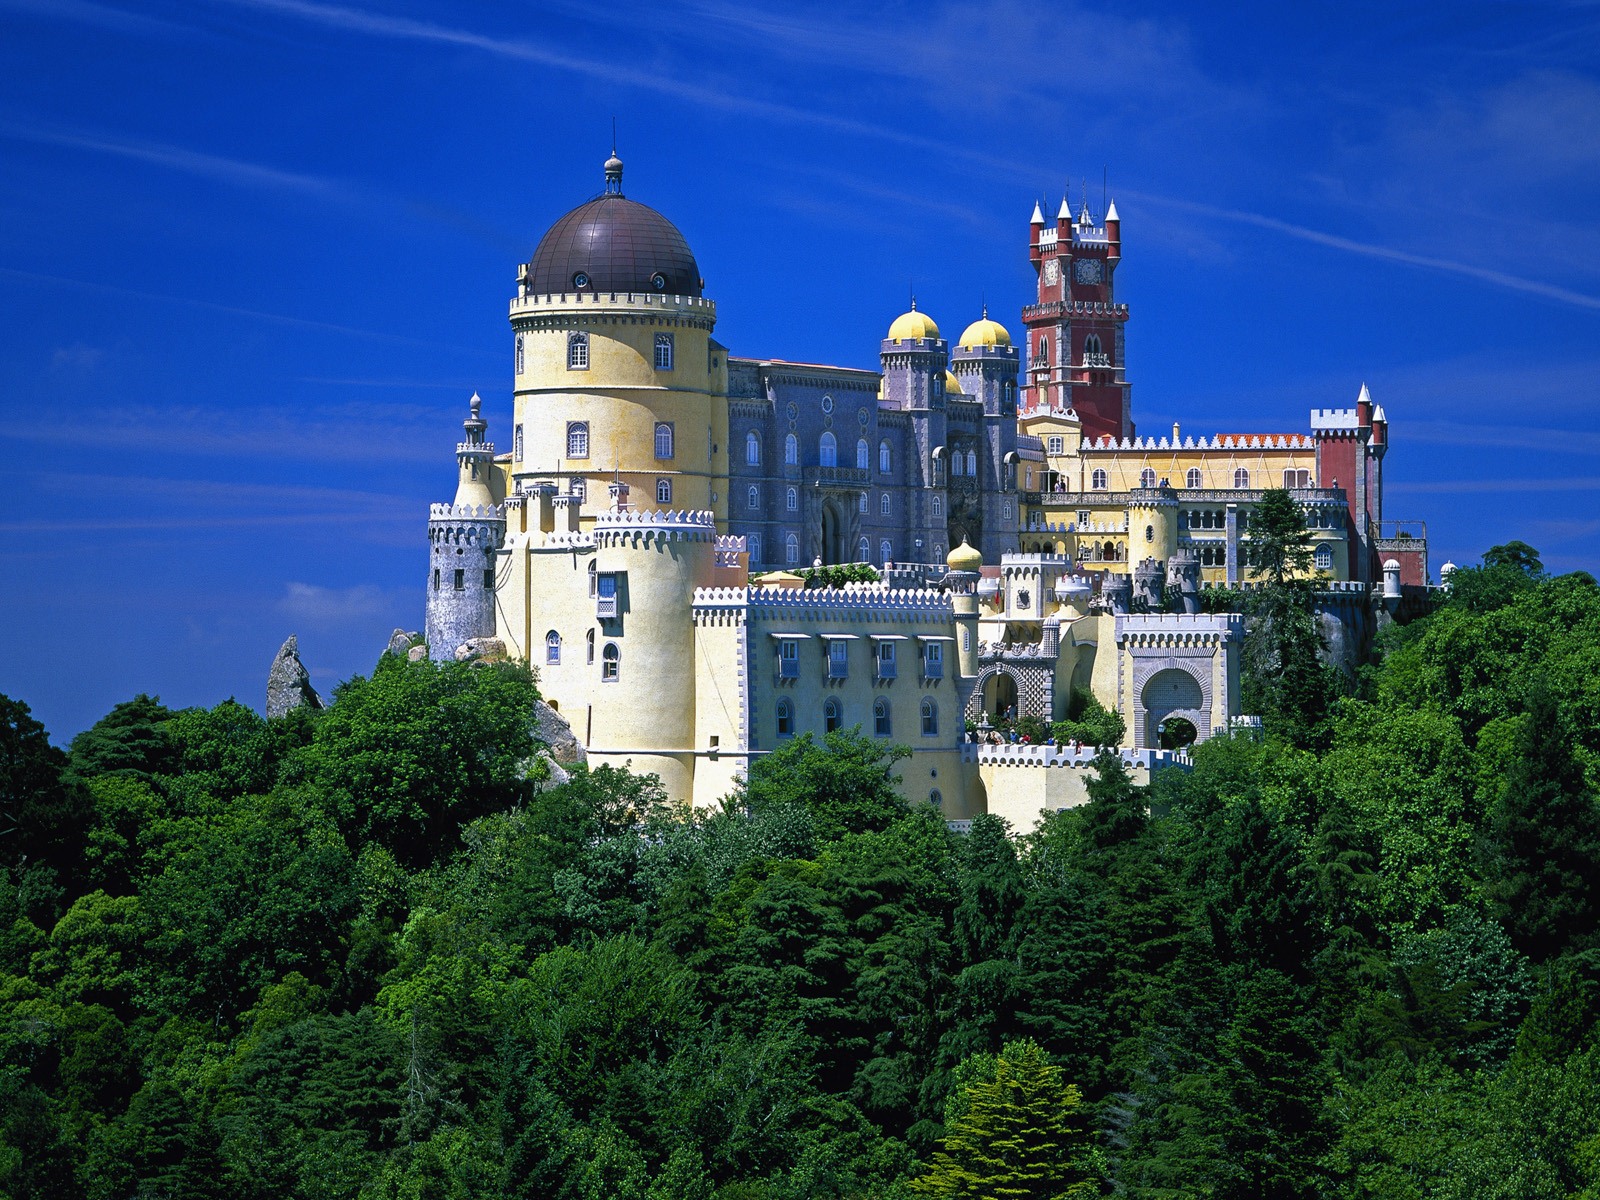 Windows 7 Wallpapers: Castles of Europe #13 - 1600x1200